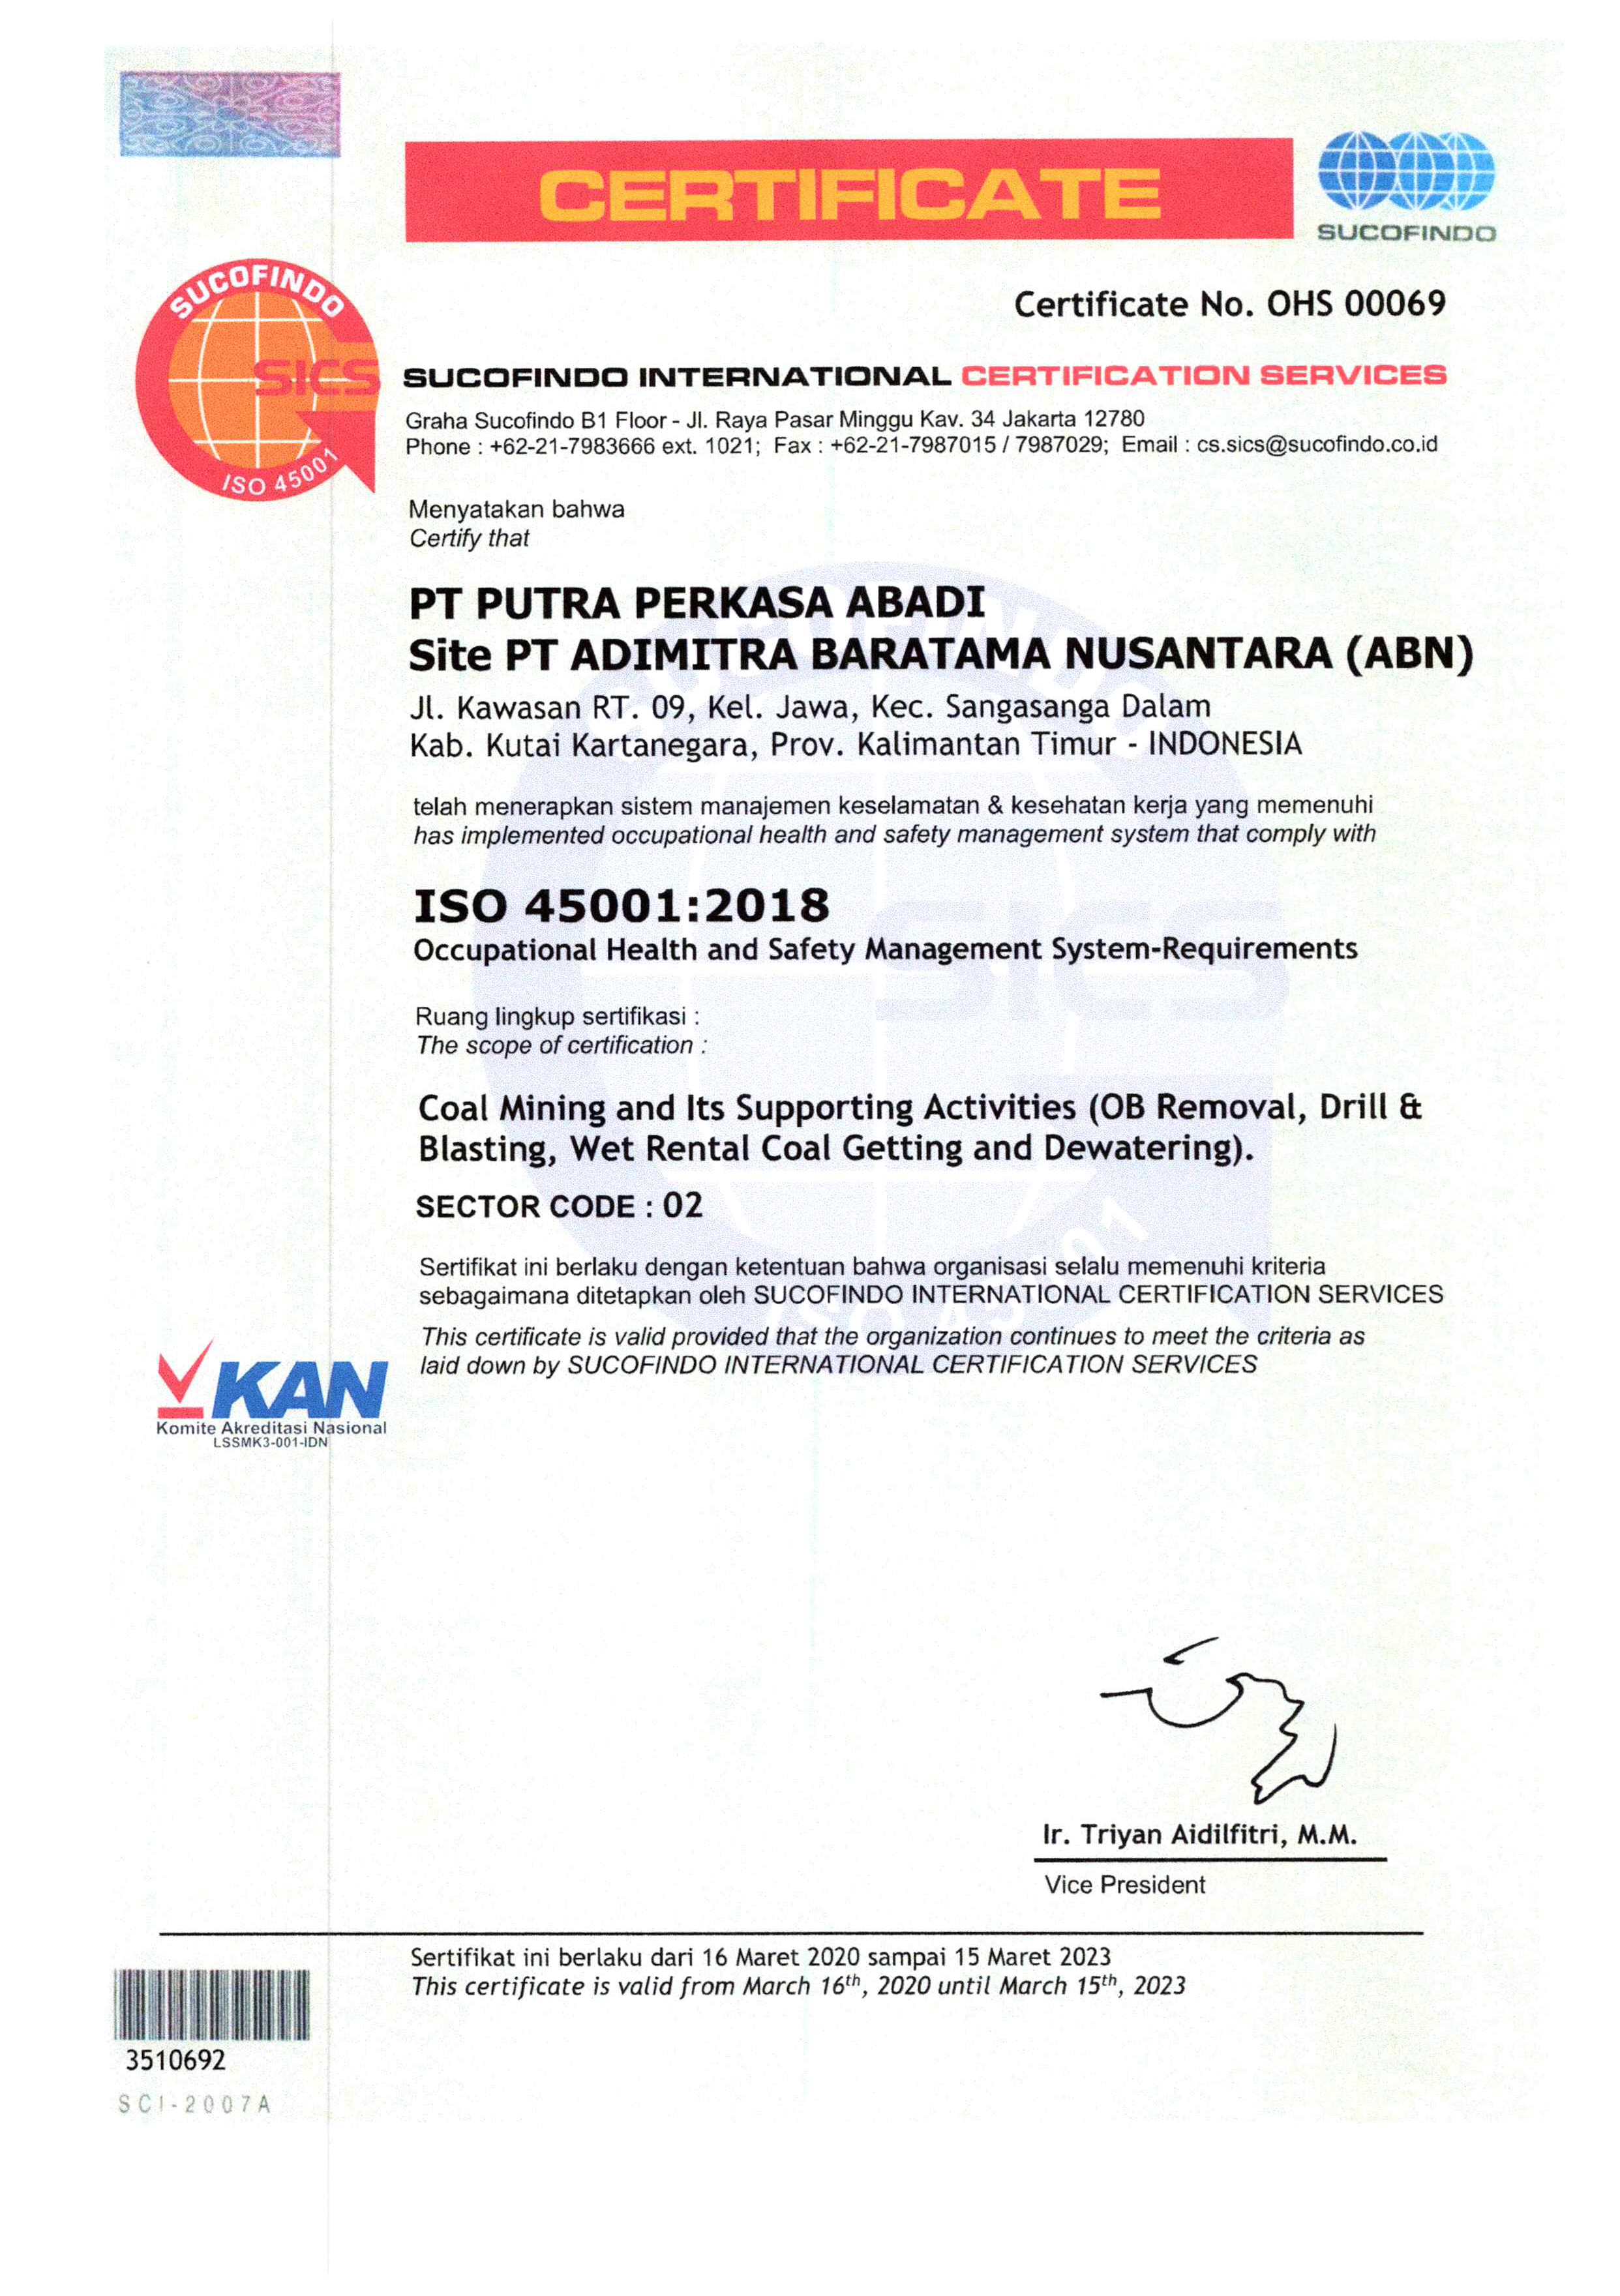 Sertifikat ISO 45001 PPA ABN_2020_Page_1